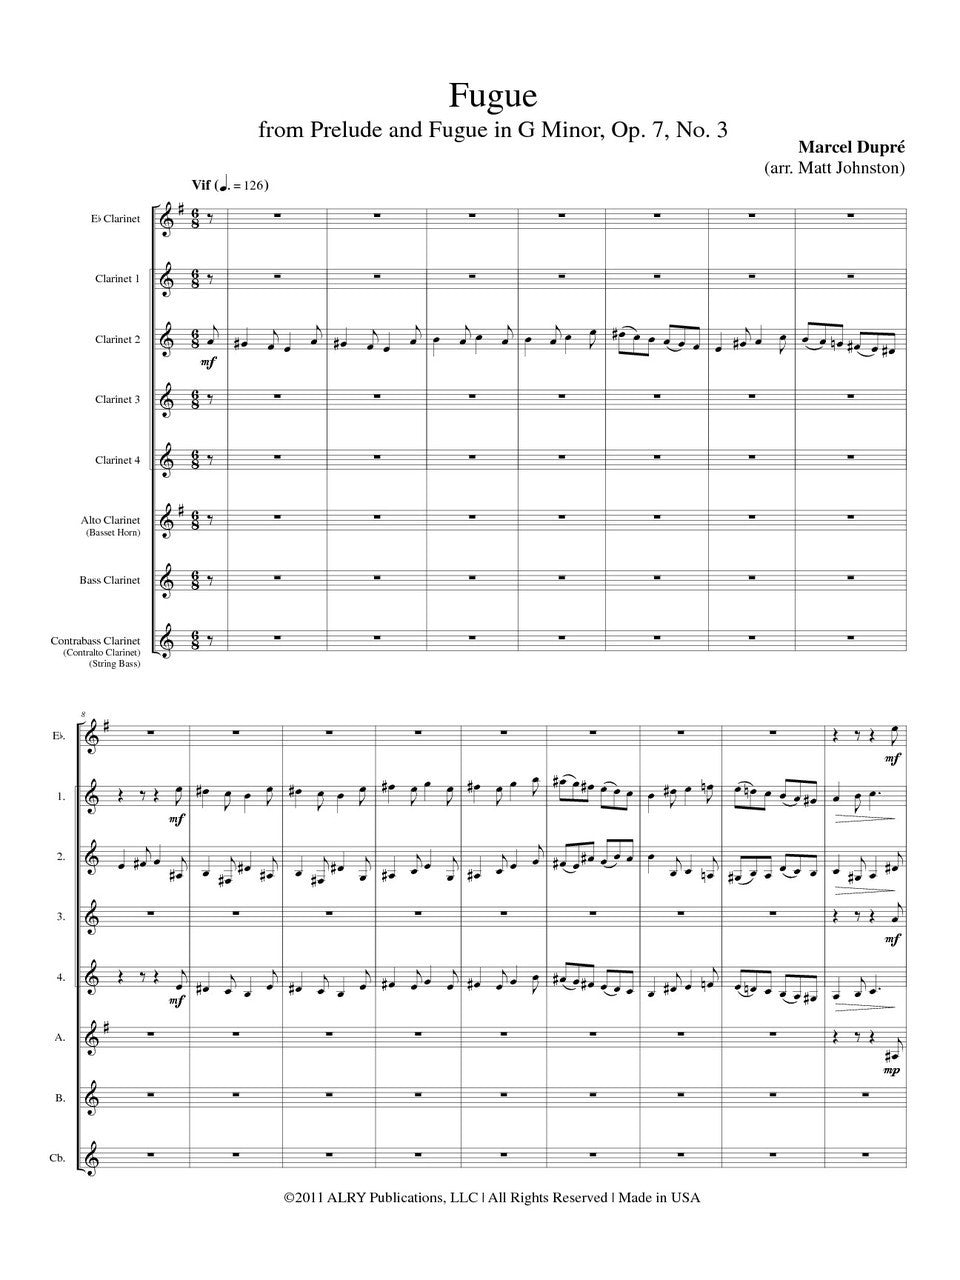 Dupre (arr. Matt Johnston) - Fugue from Prelude and Fugue in G minor for Clarinet Choir